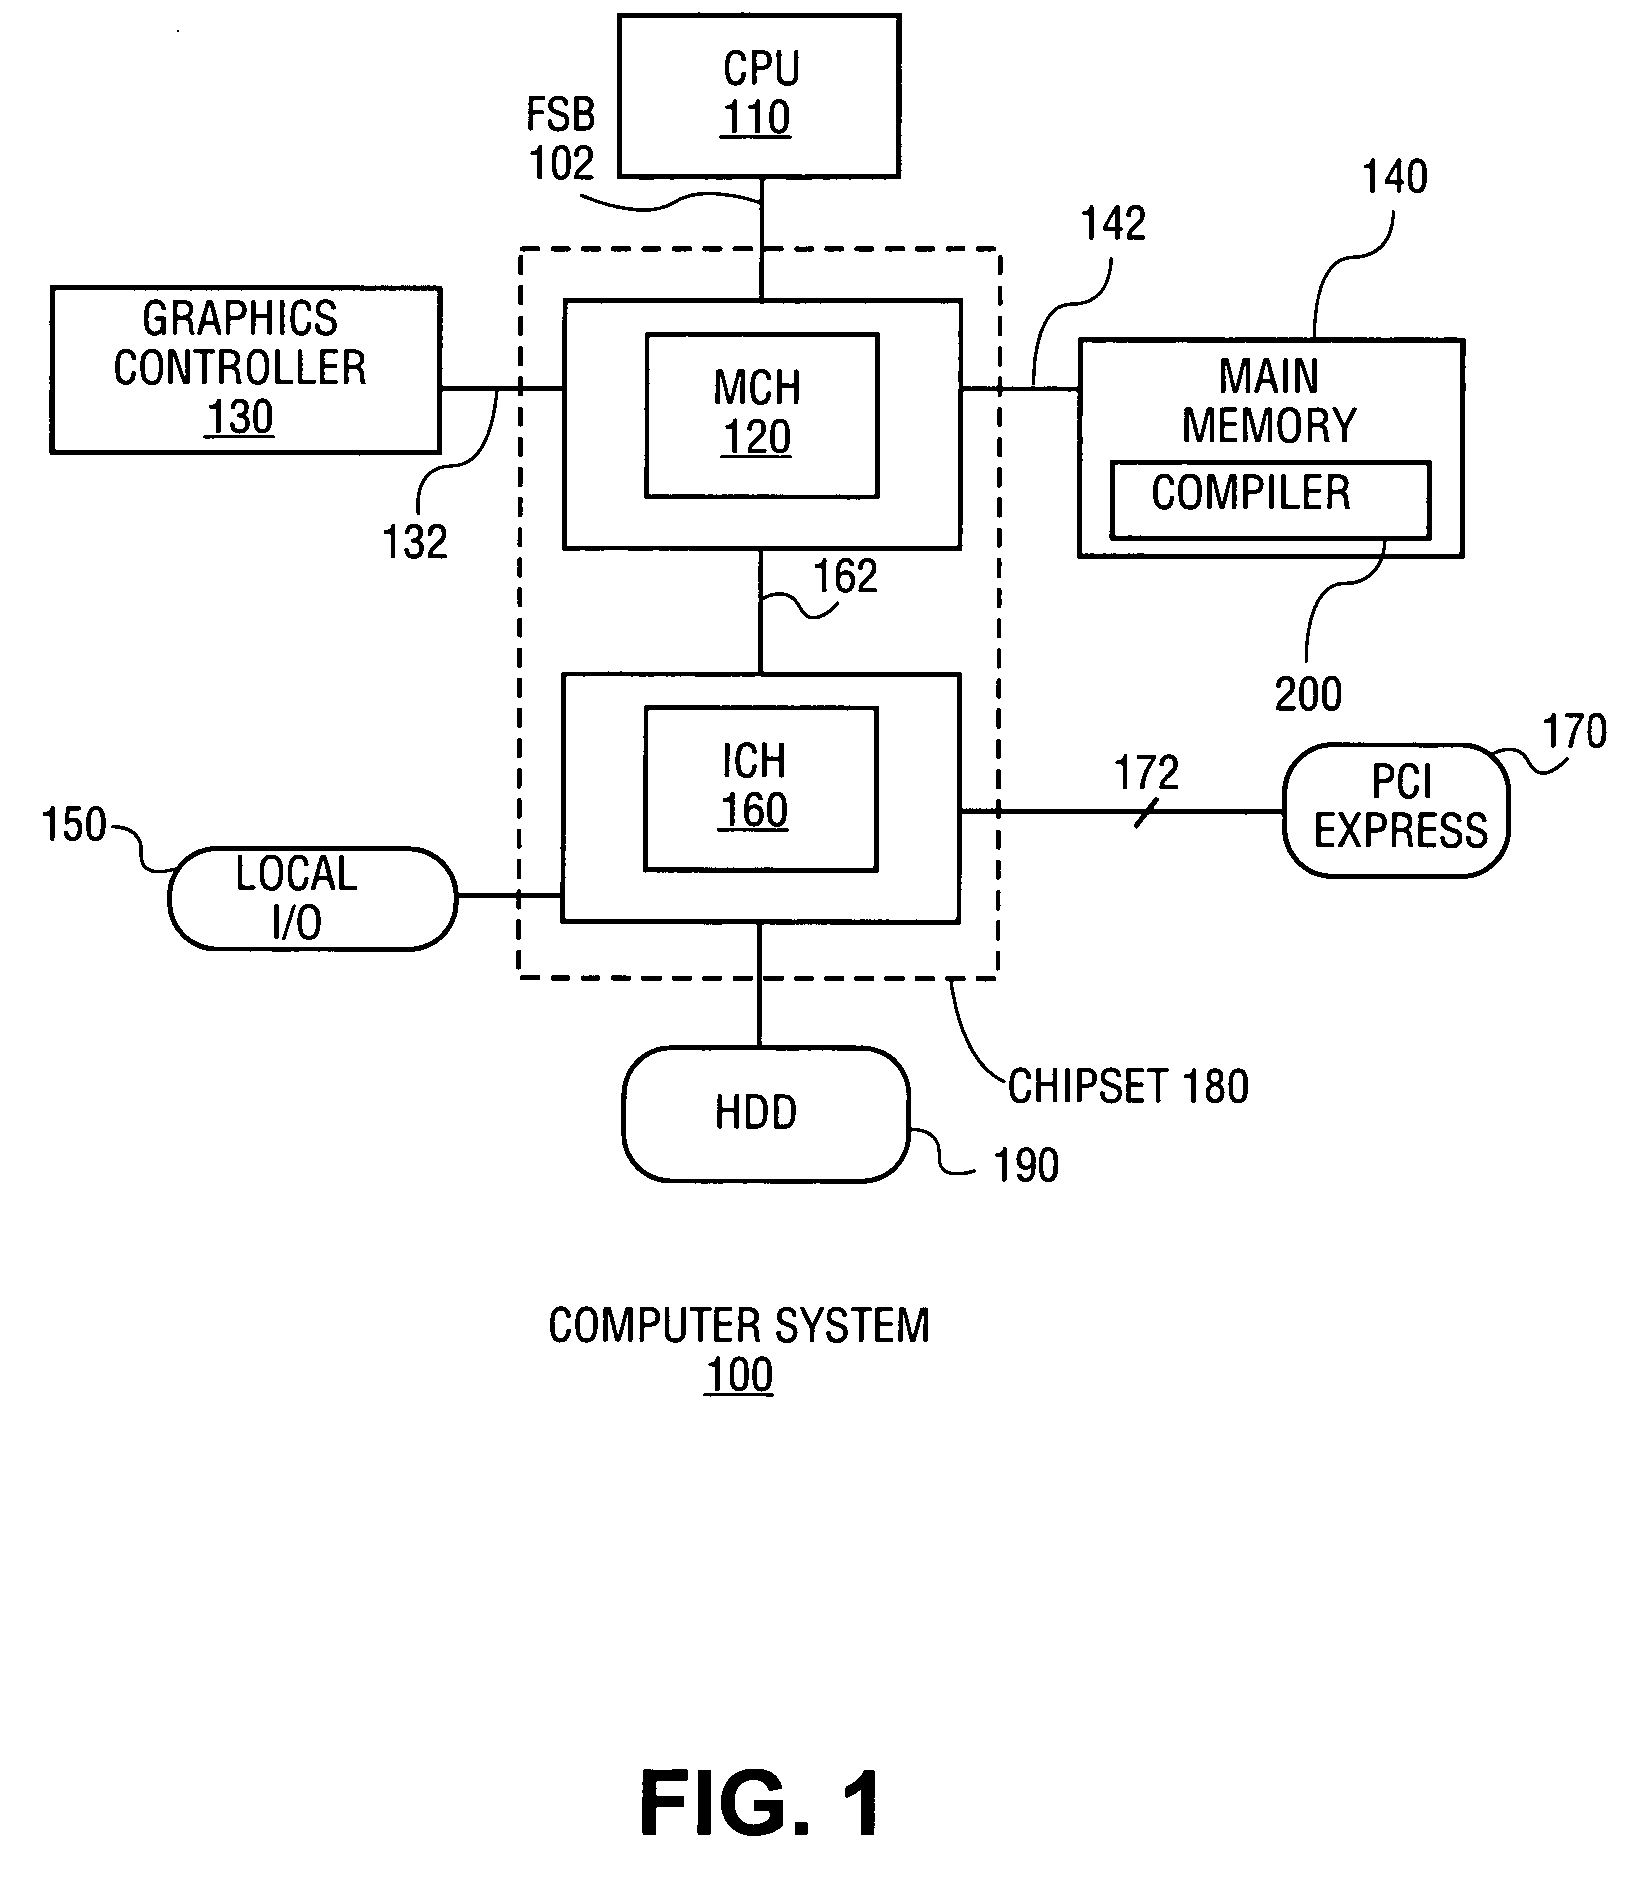 Apparatus and method for an automatic thread-partition compiler